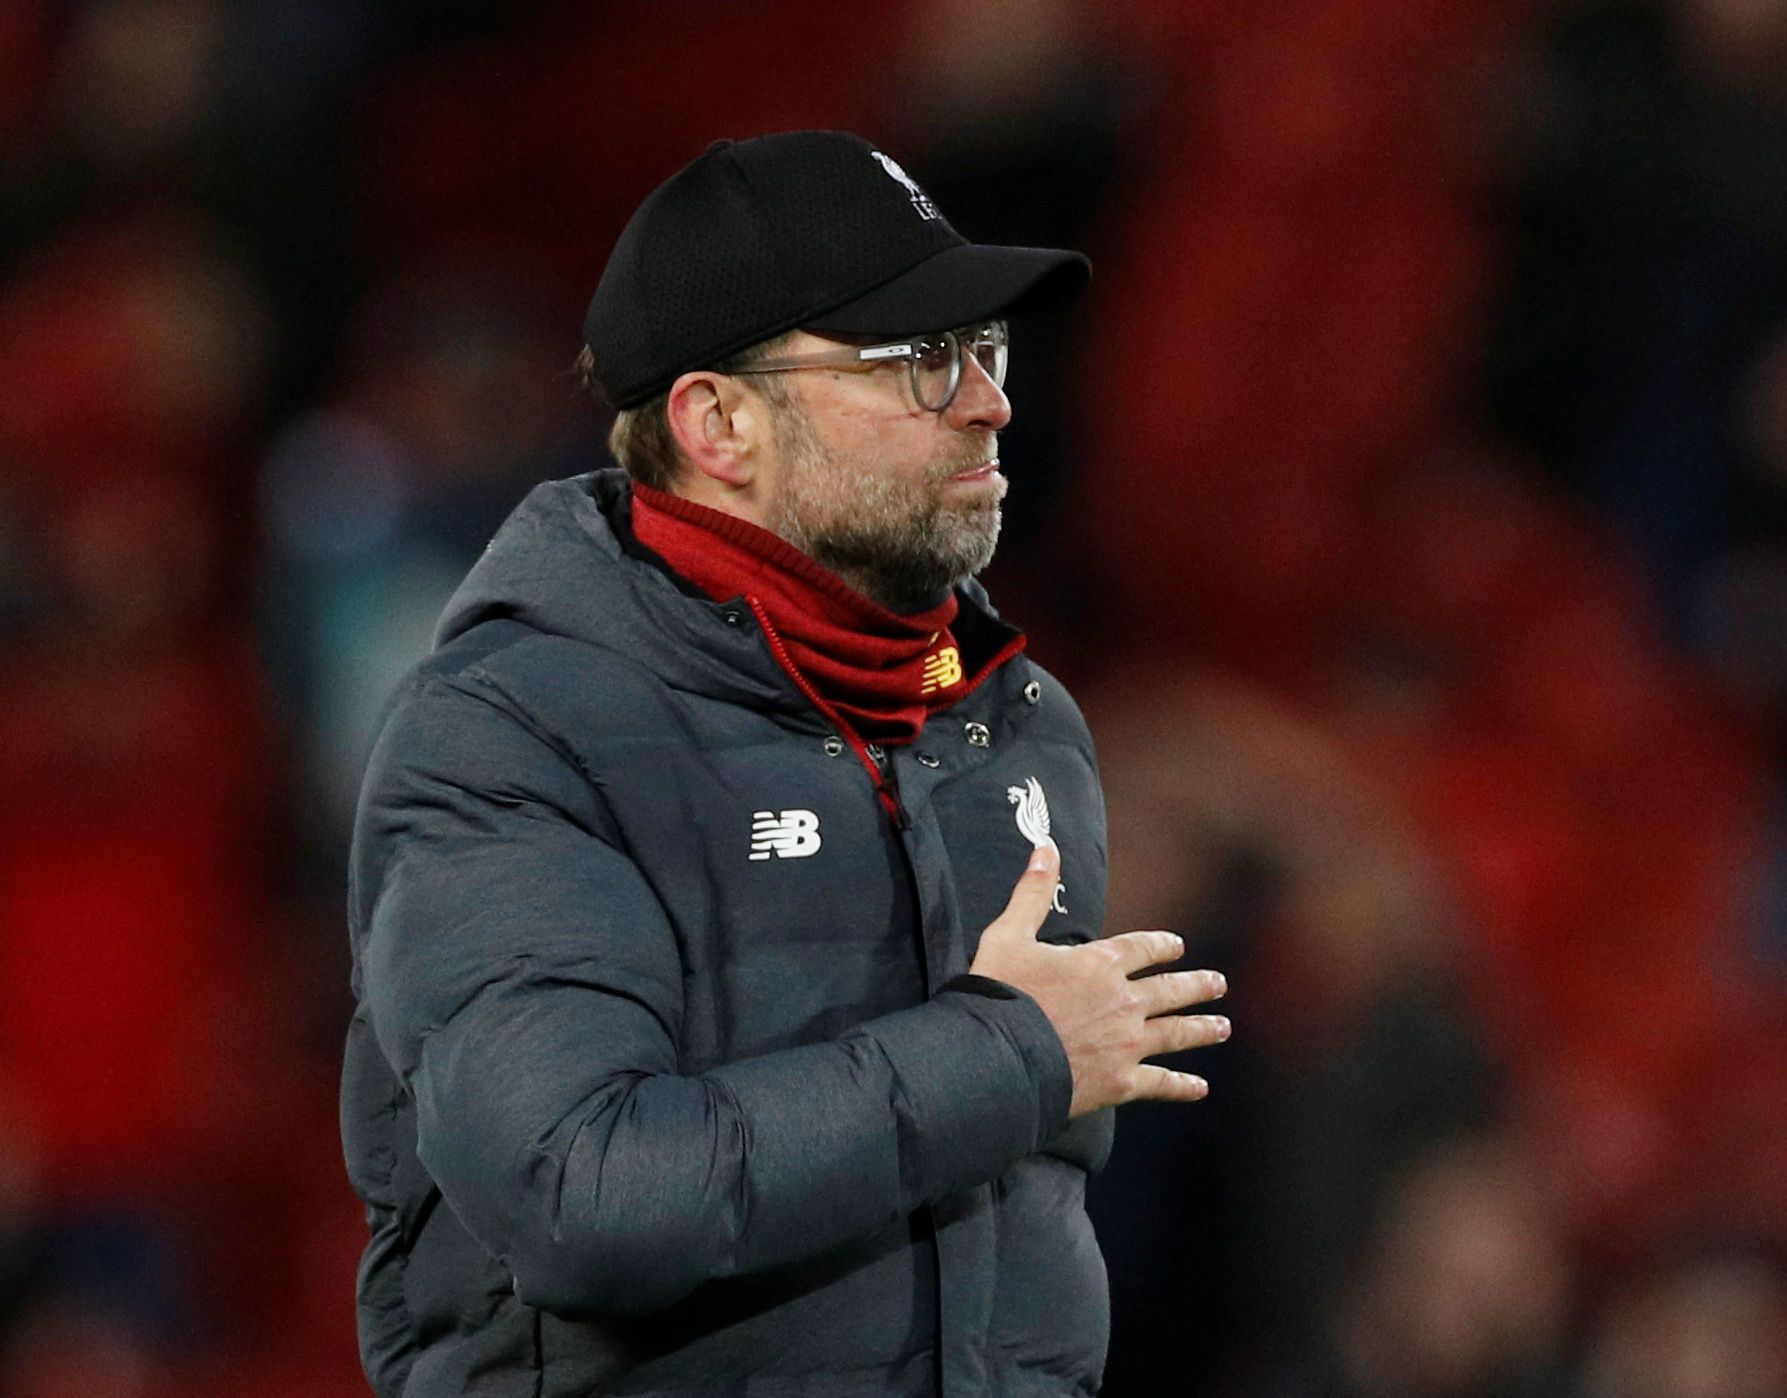 Soccer Football - Champions League - Round of 16 Second Leg - Liverpool v Atletico Madrid - Anfield, Liverpool, Britain - March 11, 2020  Liverpool manager Juergen Klopp after the match   REUTERS/Phil Noble